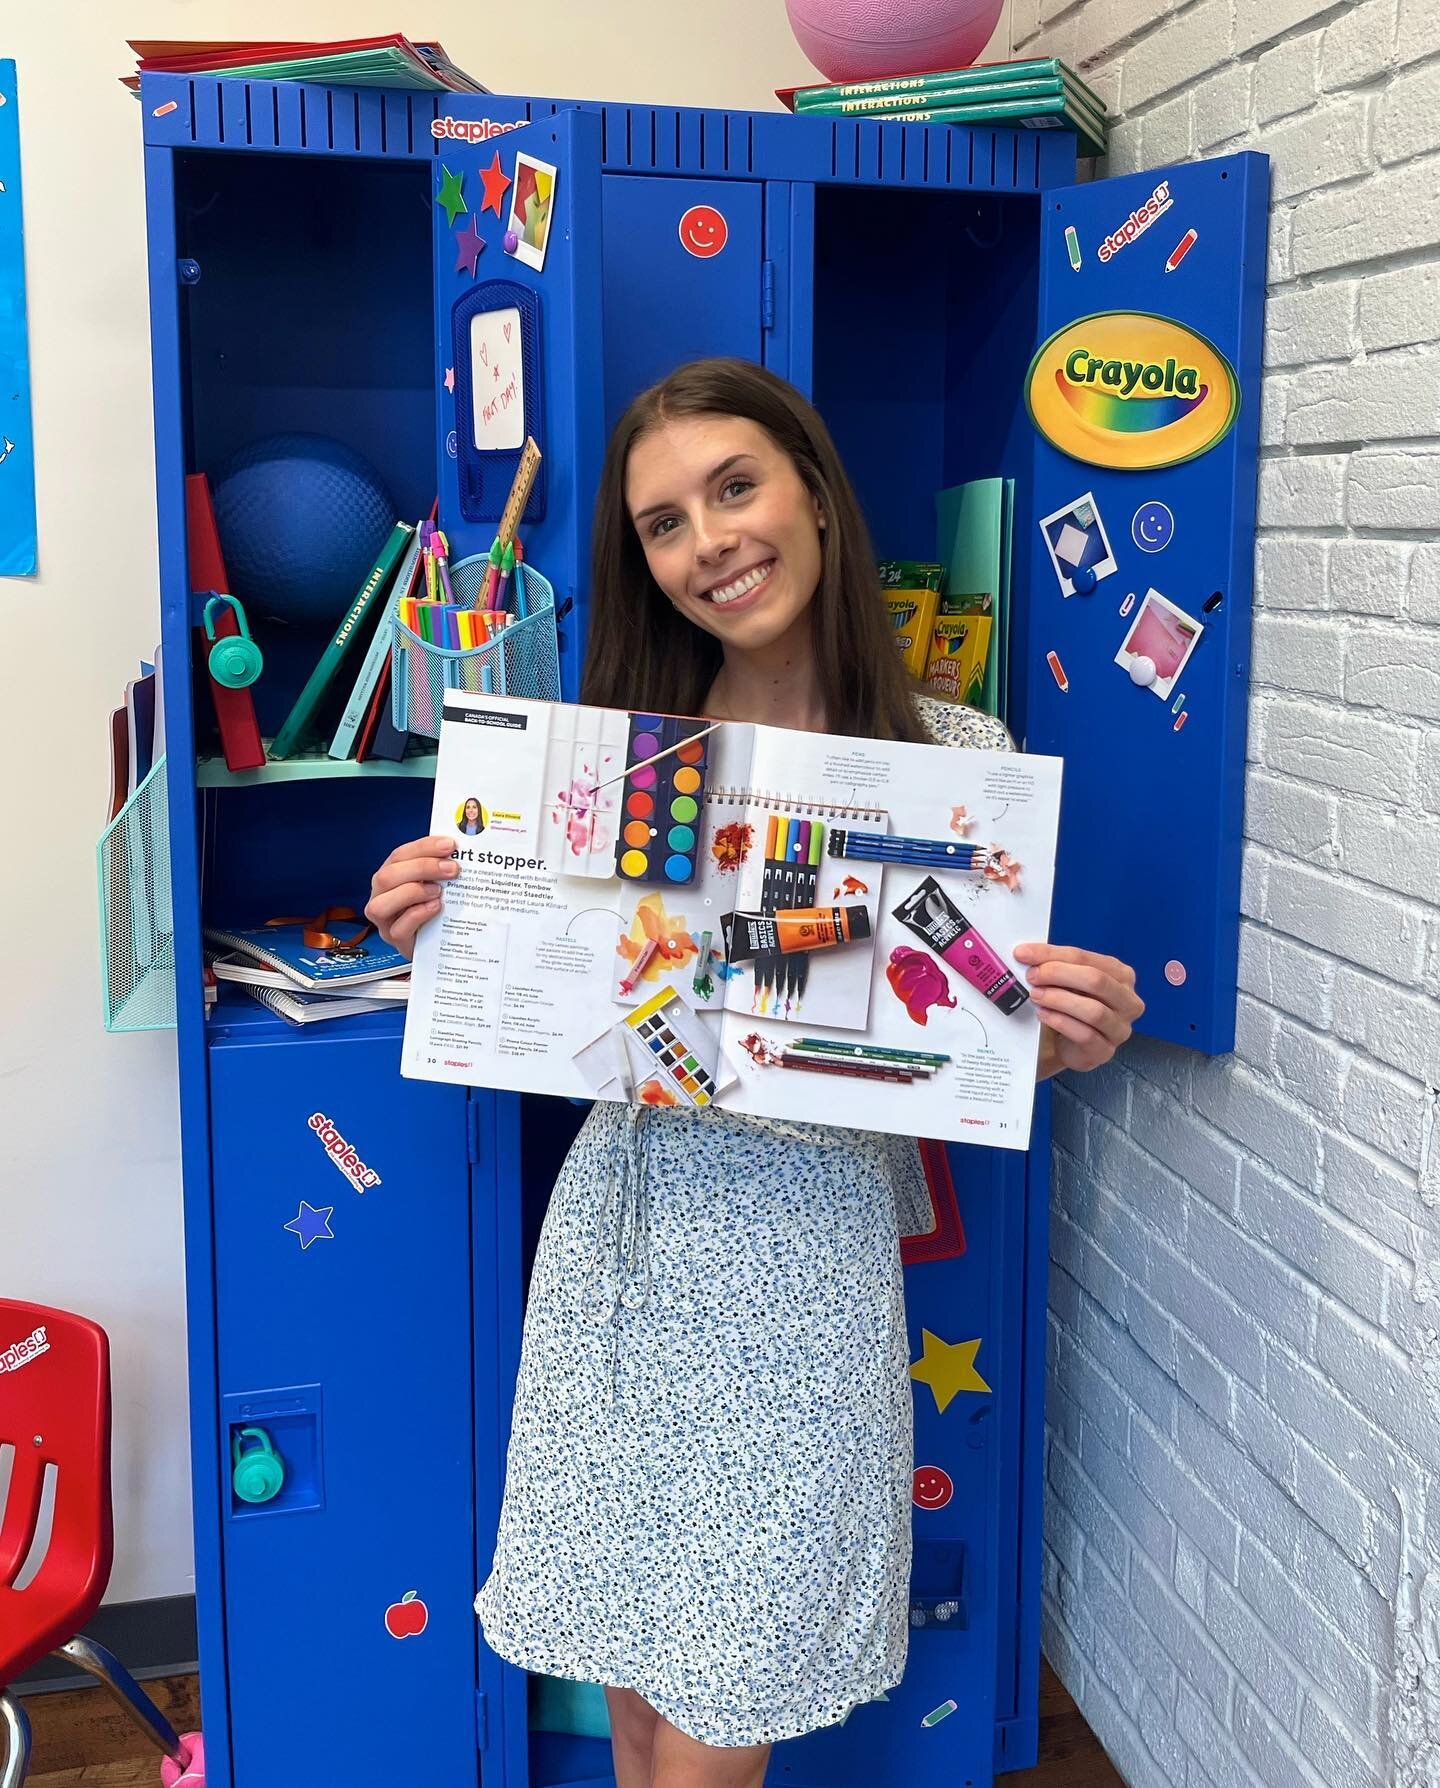 It&rsquo;s officially launched!! Stay tuned to see more of what I&rsquo;ve been working on the past few months with Staples Canada and in the mean time, visit your local store or Staples.ca to find me in Canada&rsquo;s Official Back-to-School Guide! 